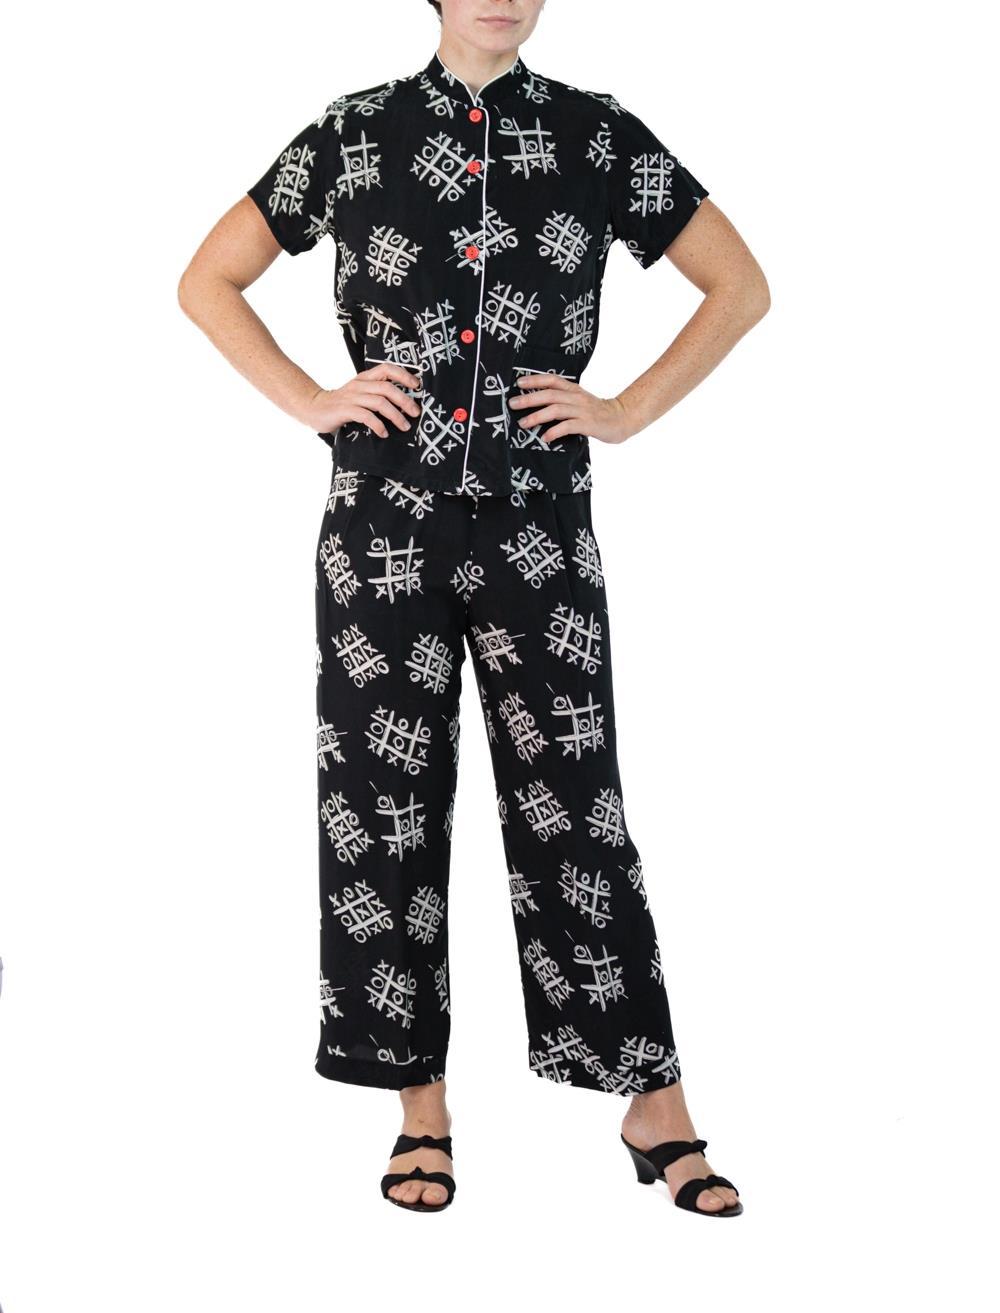 Morphew Collection Black & White Tic Tac Toe Novelty Print Cold Rayon Bias Paja For Sale 4